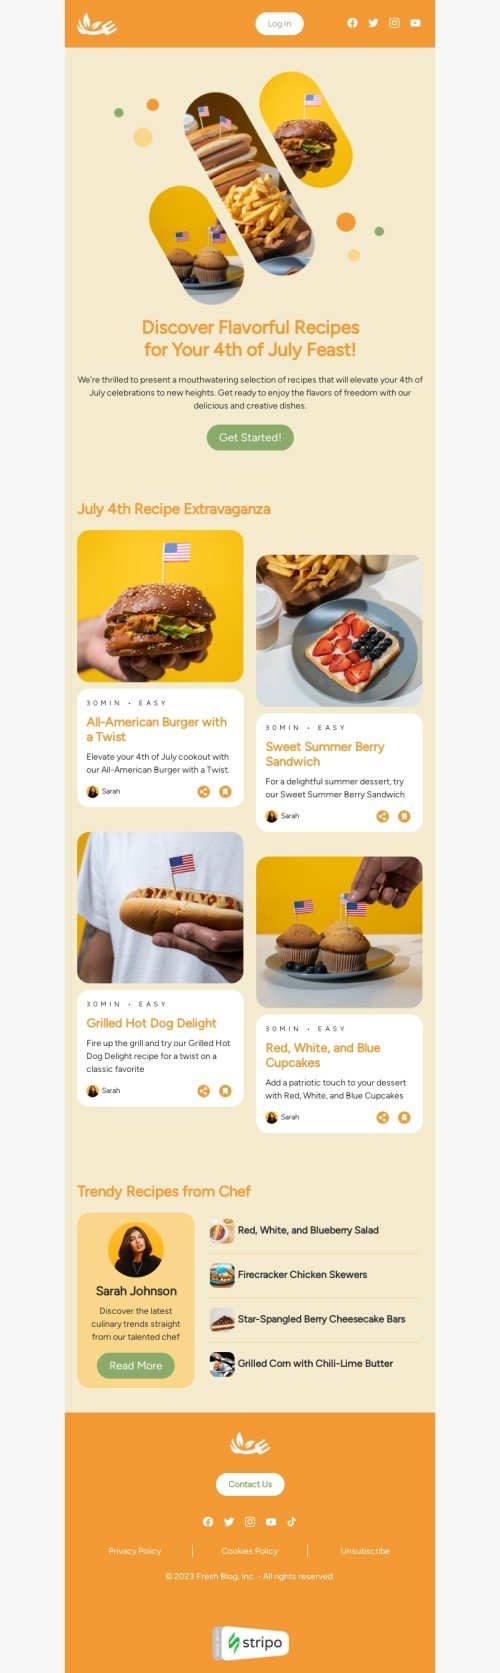 Independence Day email template "July 4th recipe extravaganza" for food industry desktop view